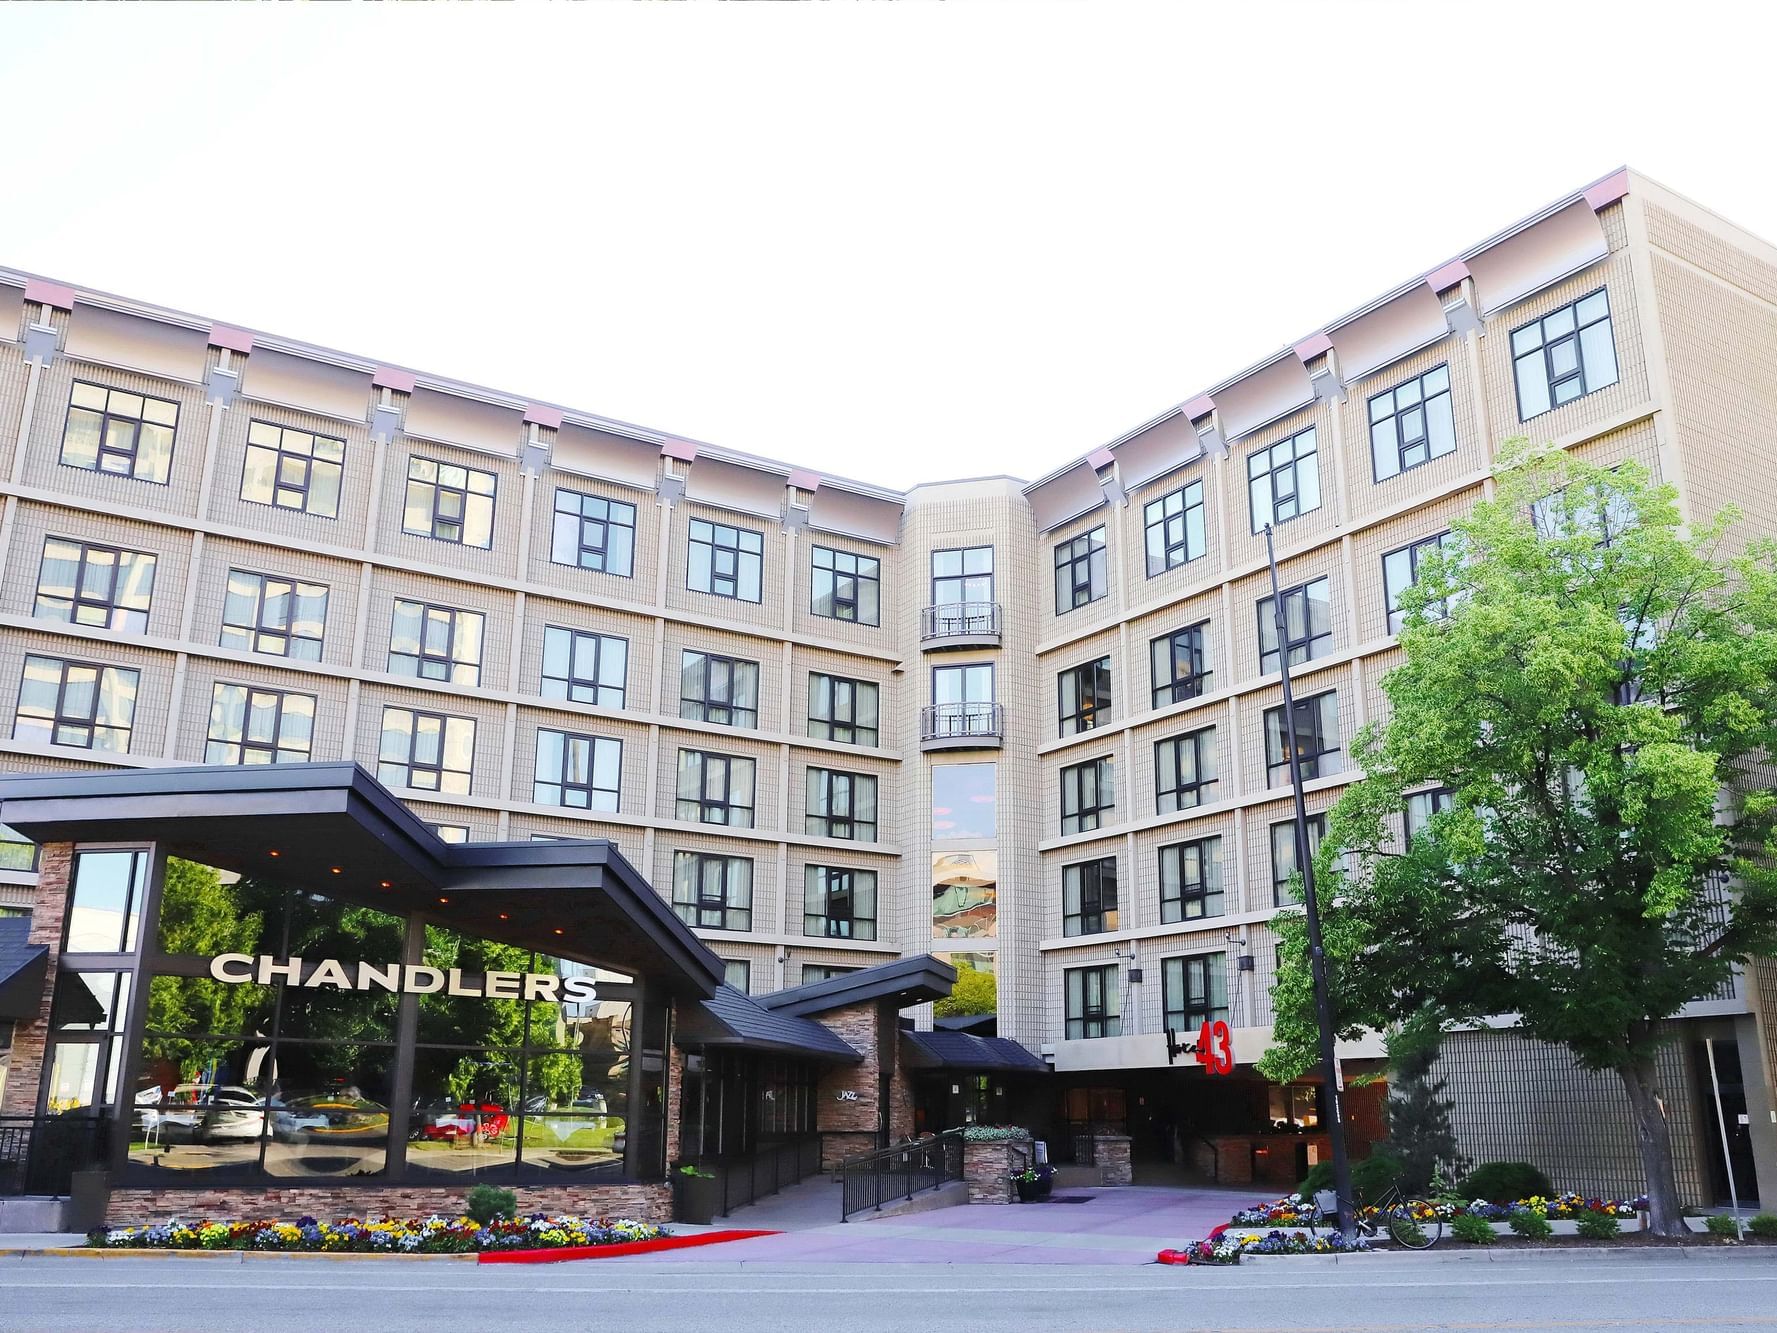 Exterior of the to Chandlers near The Grove Hotel